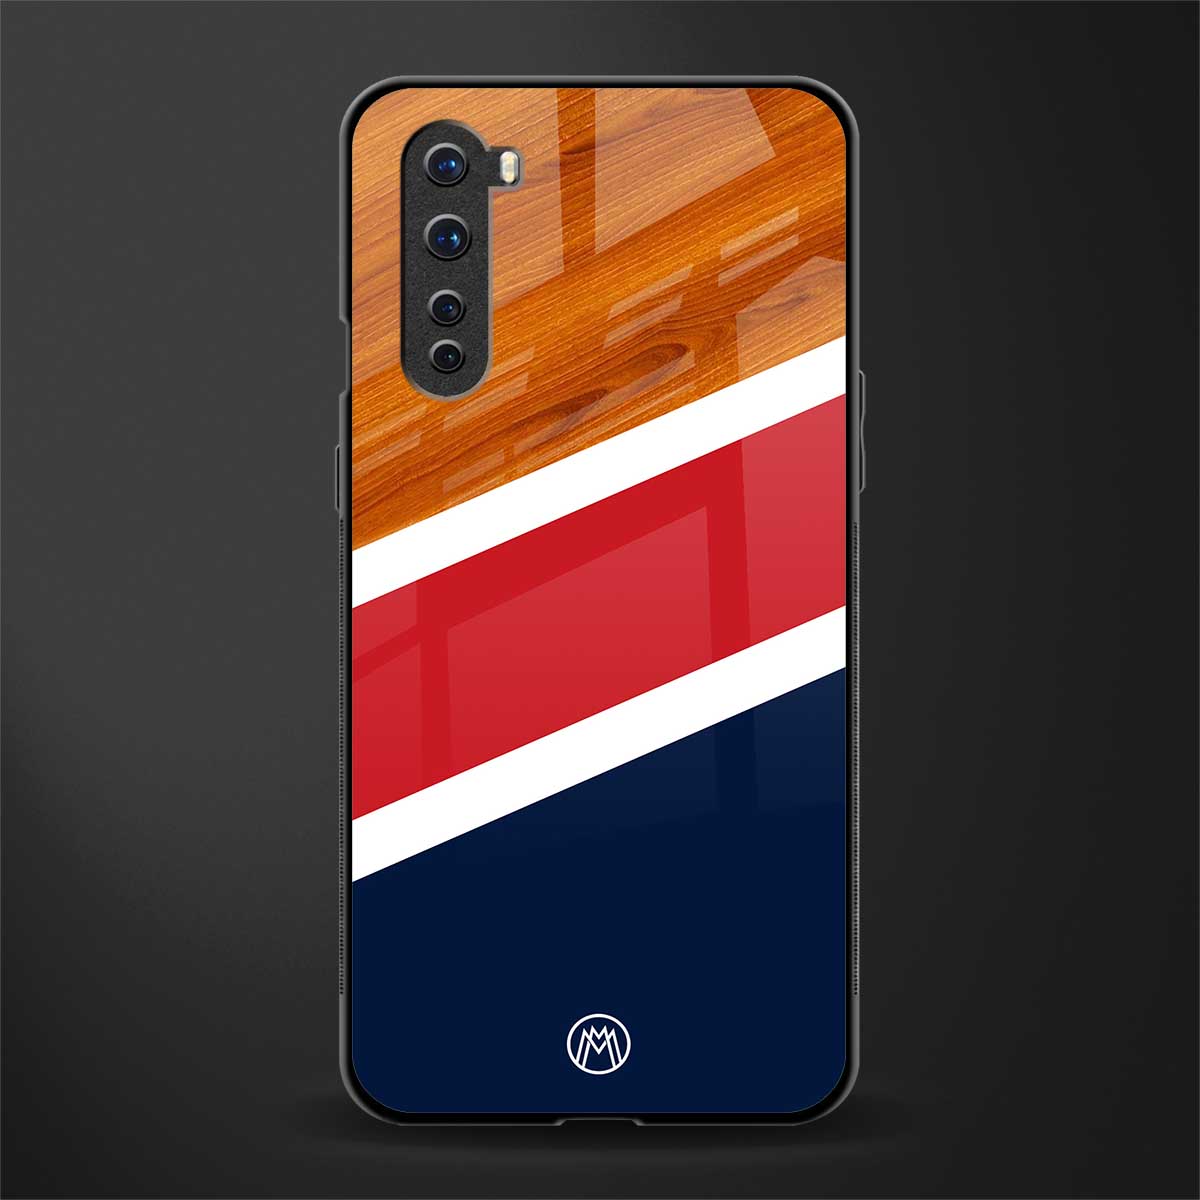 minimalistic wooden pattern glass case for oneplus nord ac2001 image